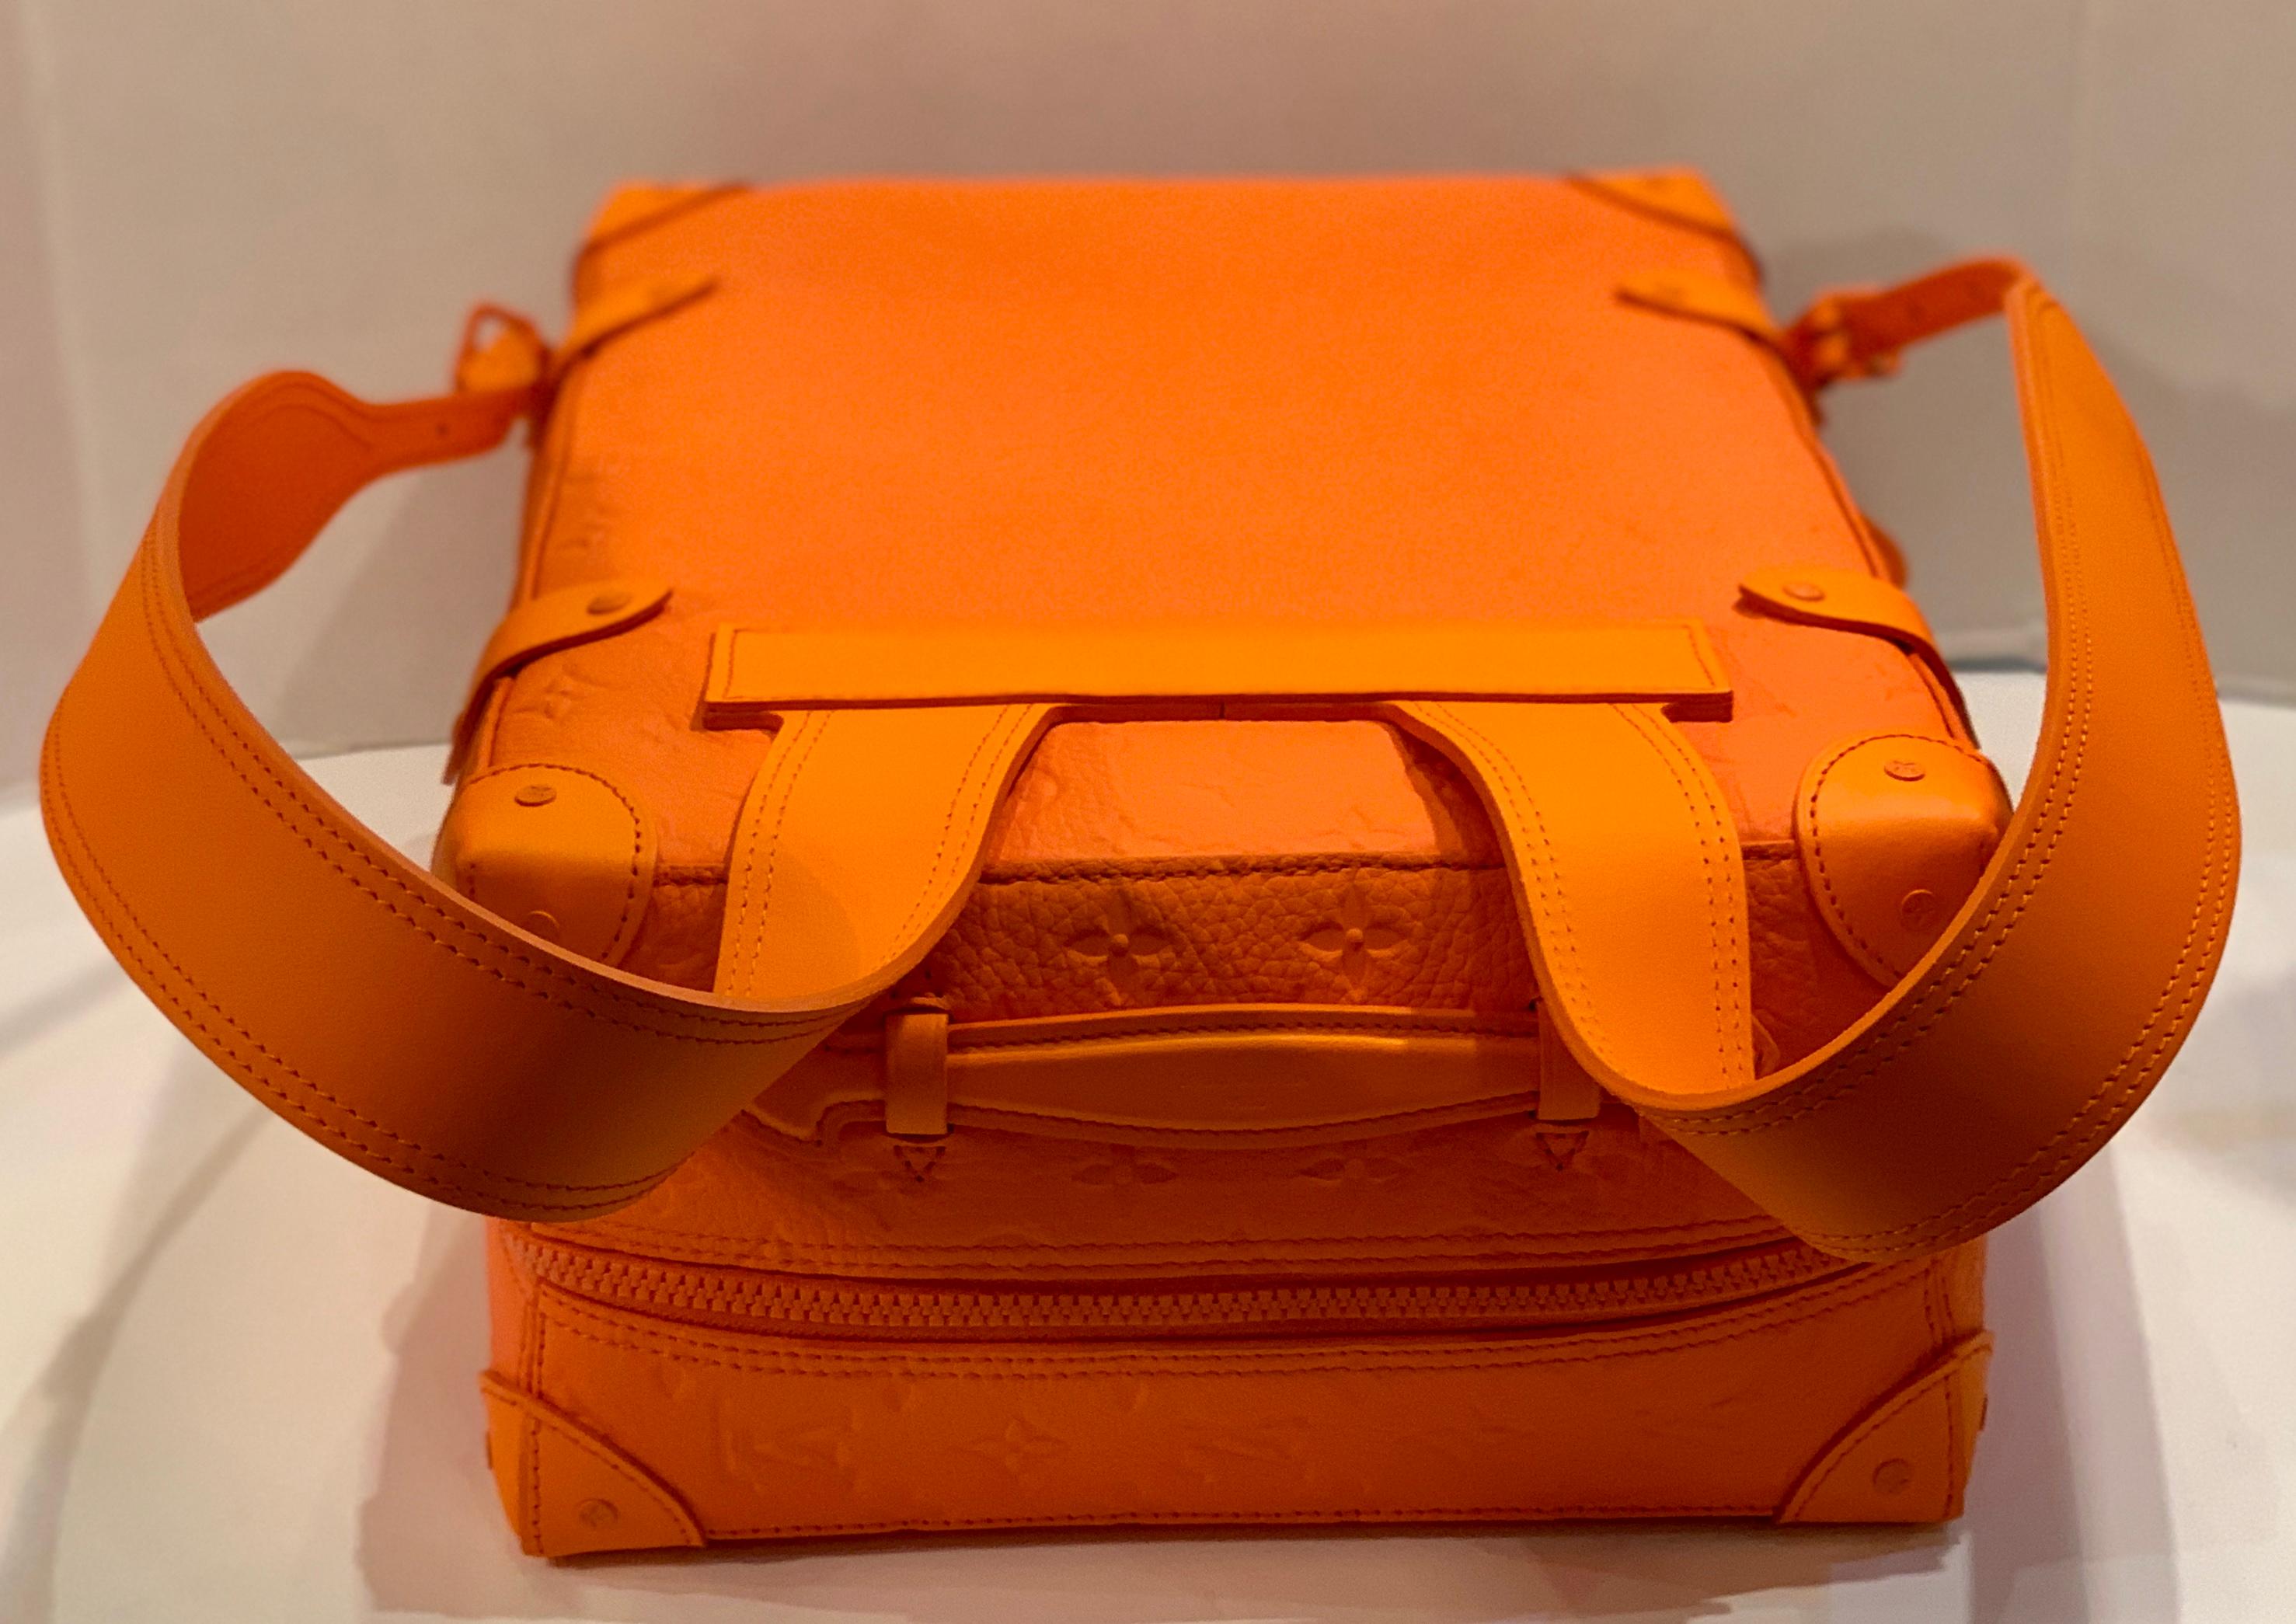 SOLD OUT Louis Vuitton Virgil Abloh Figures of Speech Orange Soft Trunk Backpack 3